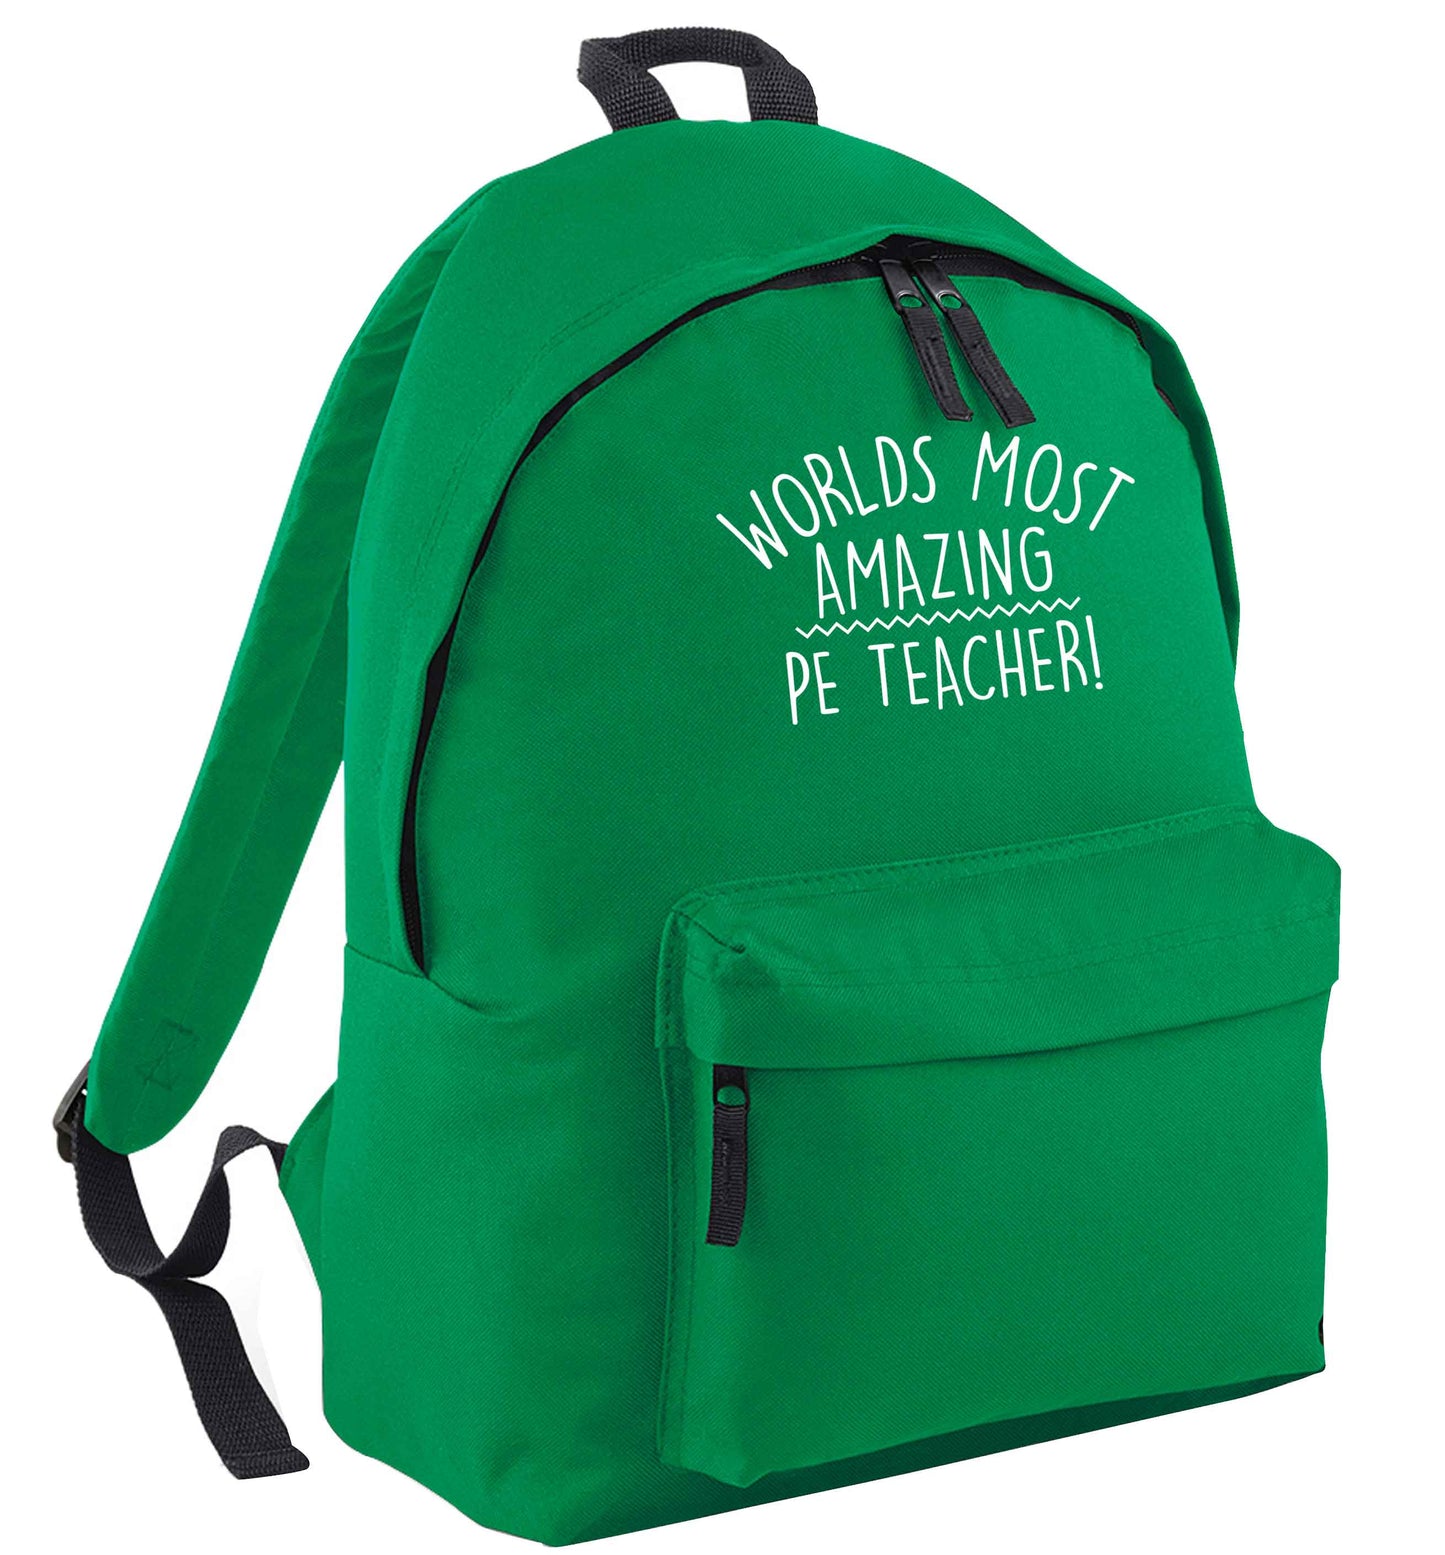 Worlds most amazing PE teacher green adults backpack